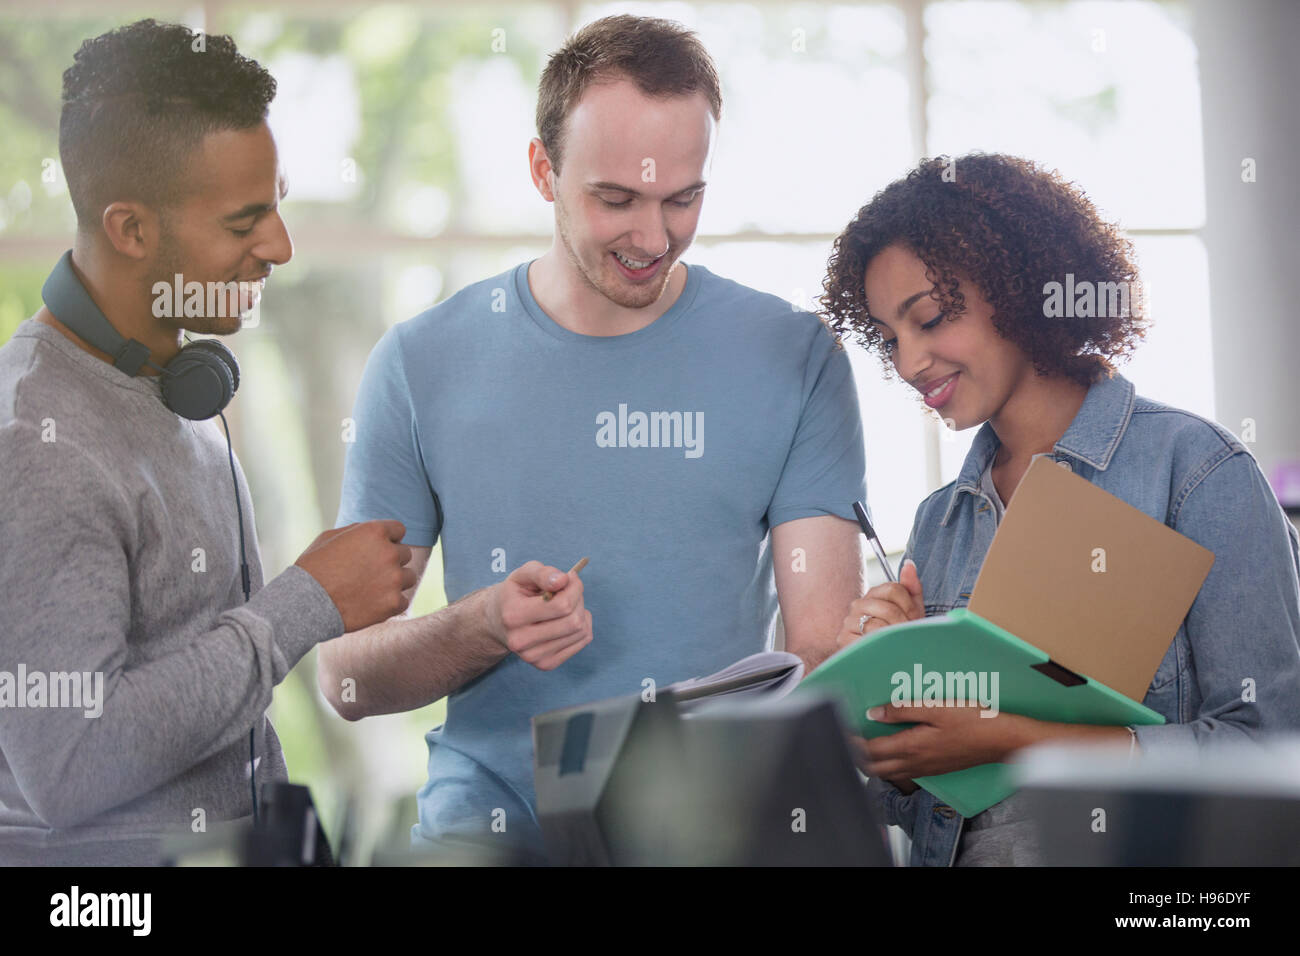 College students discussing homework Stock Photo